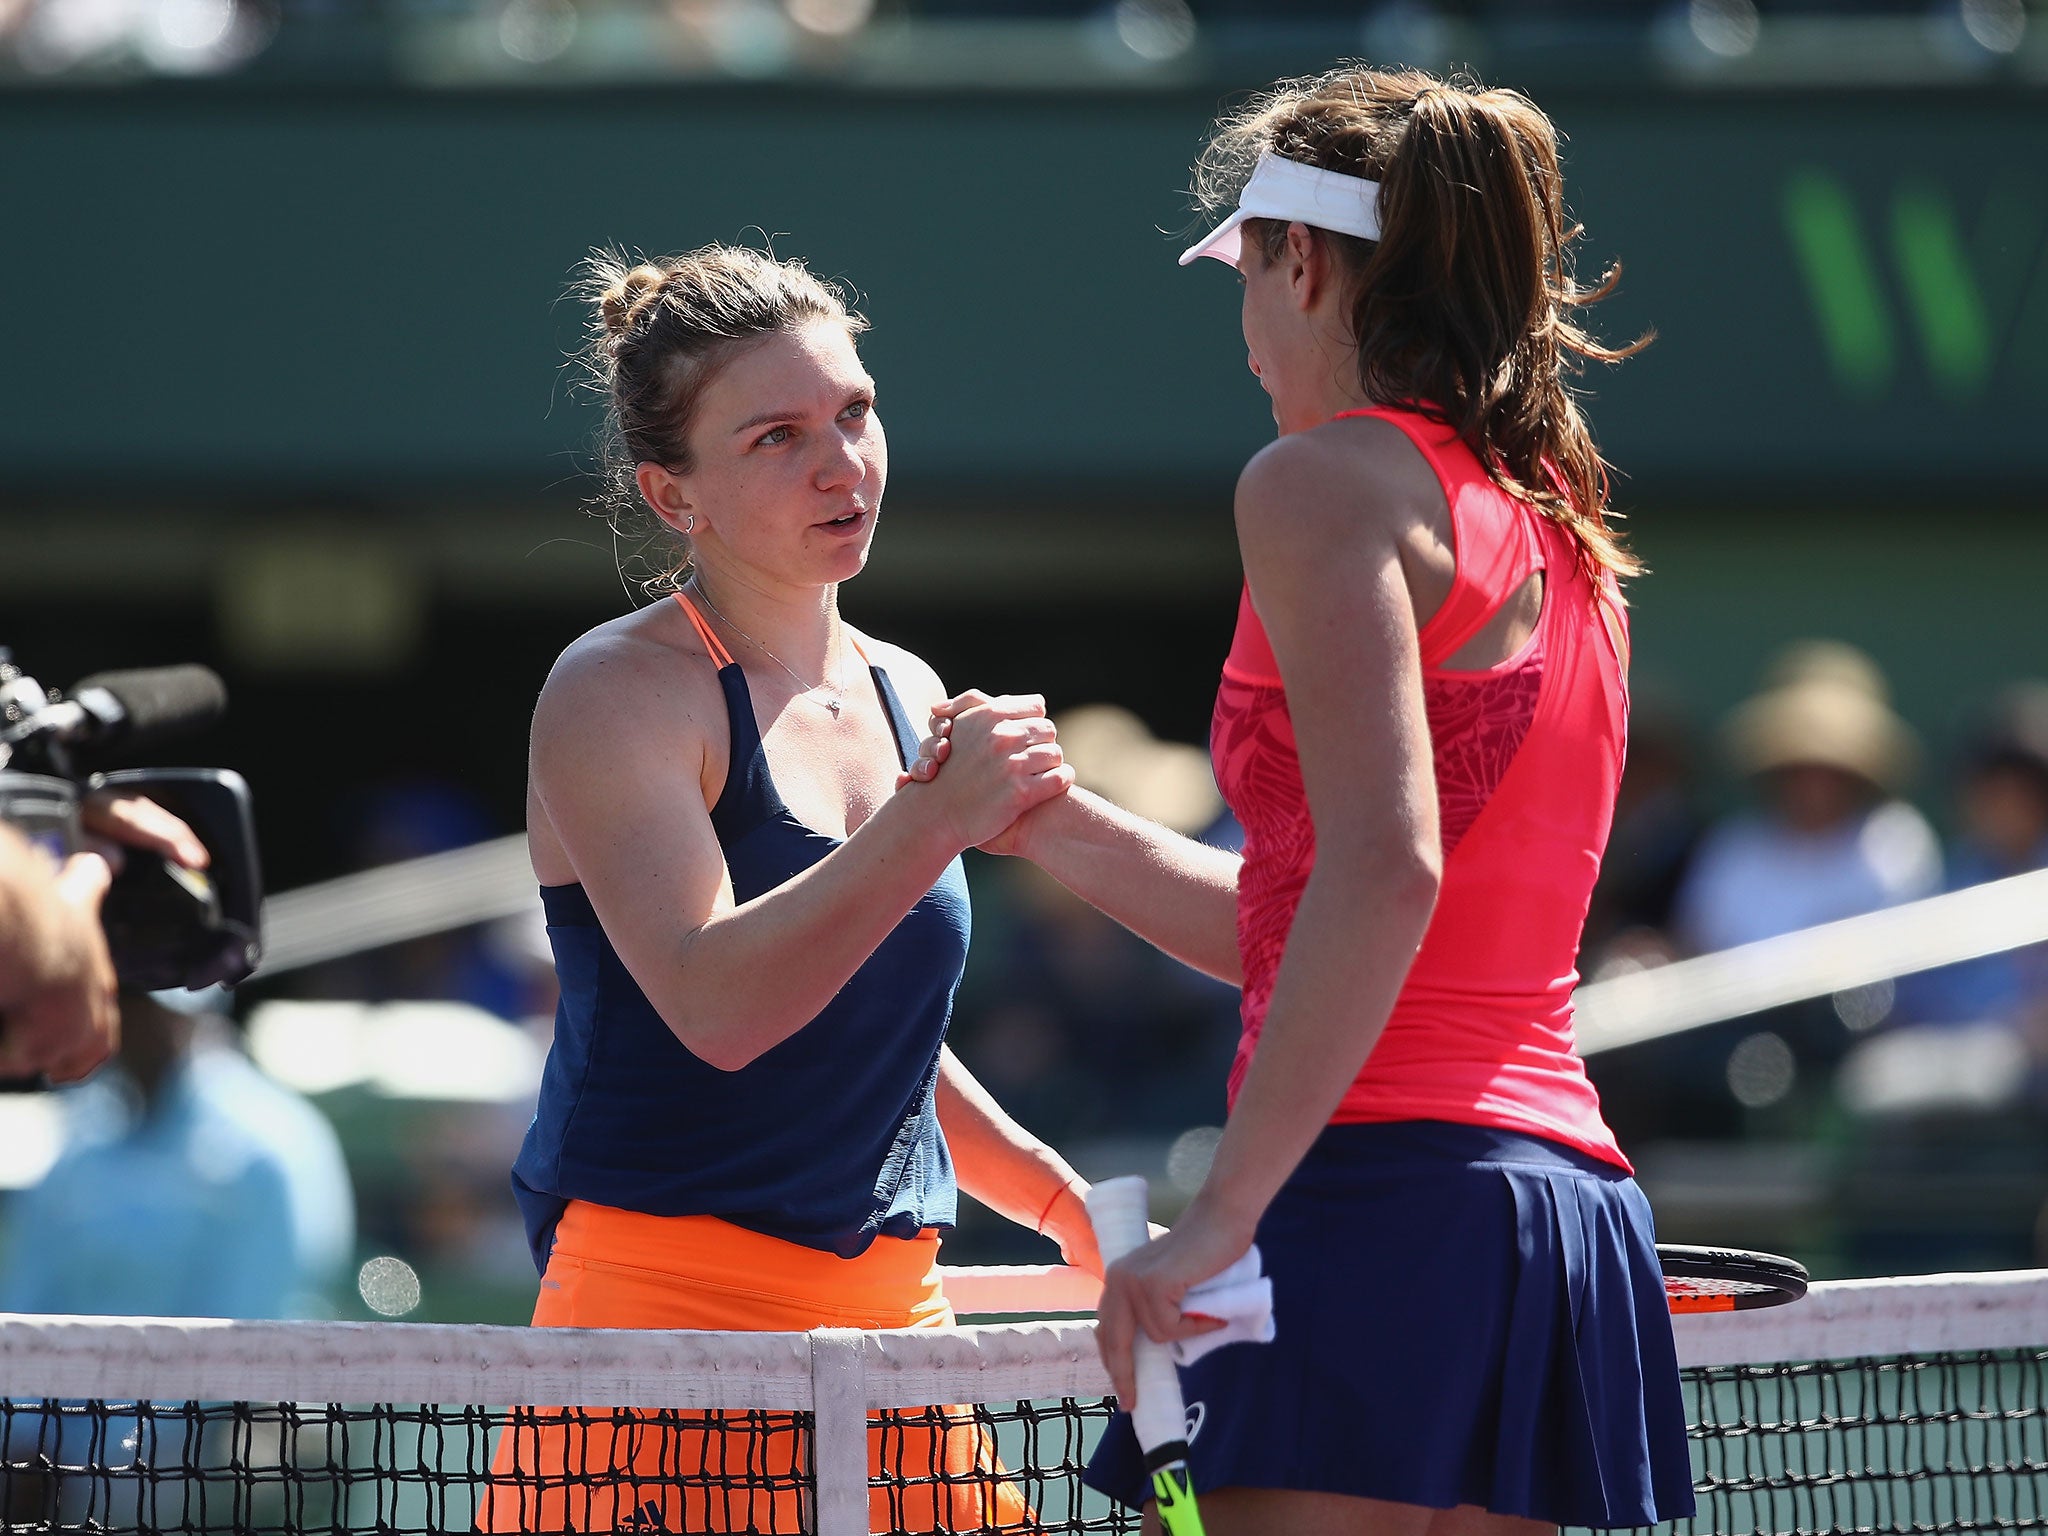 &#13;
Konta fought back after Halep served for the match in Miami &#13;